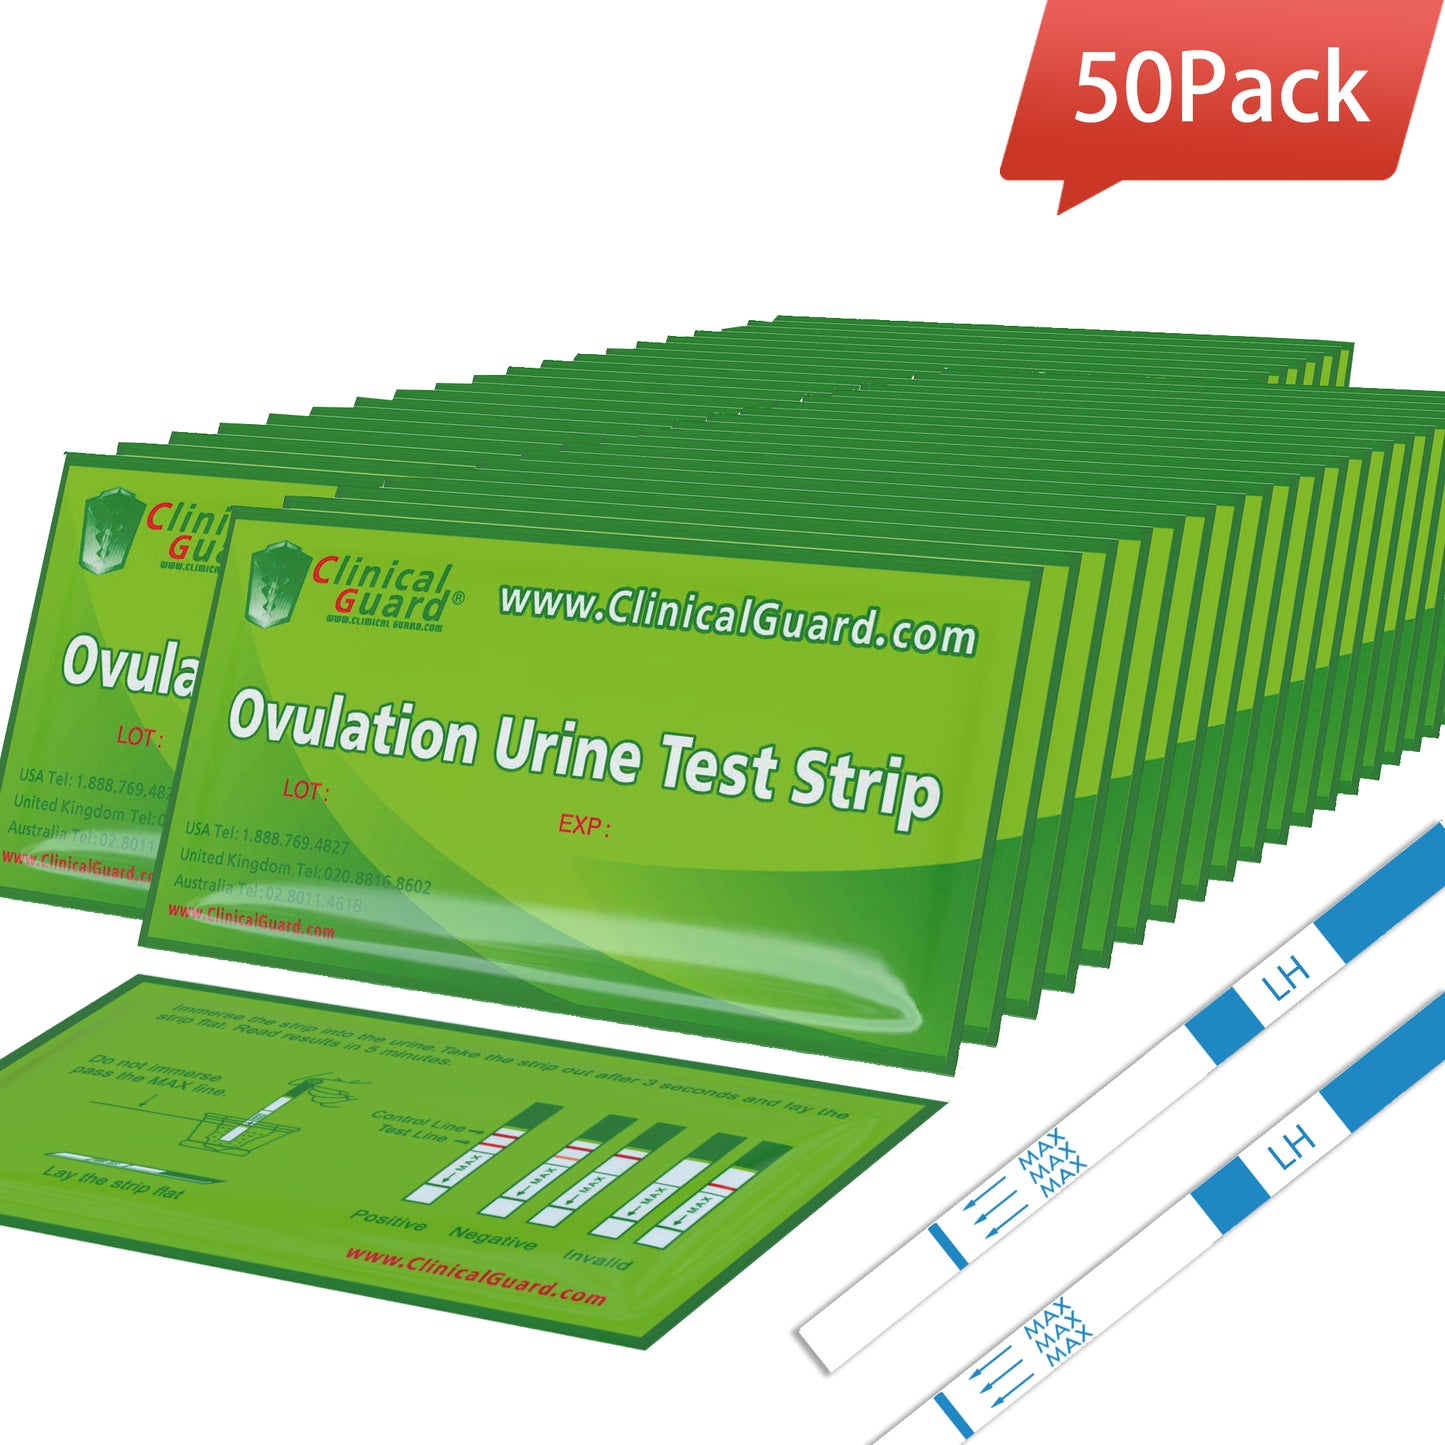 Clincial_Guard_Ovulation_Urine_Test_Strips_50_Pack_